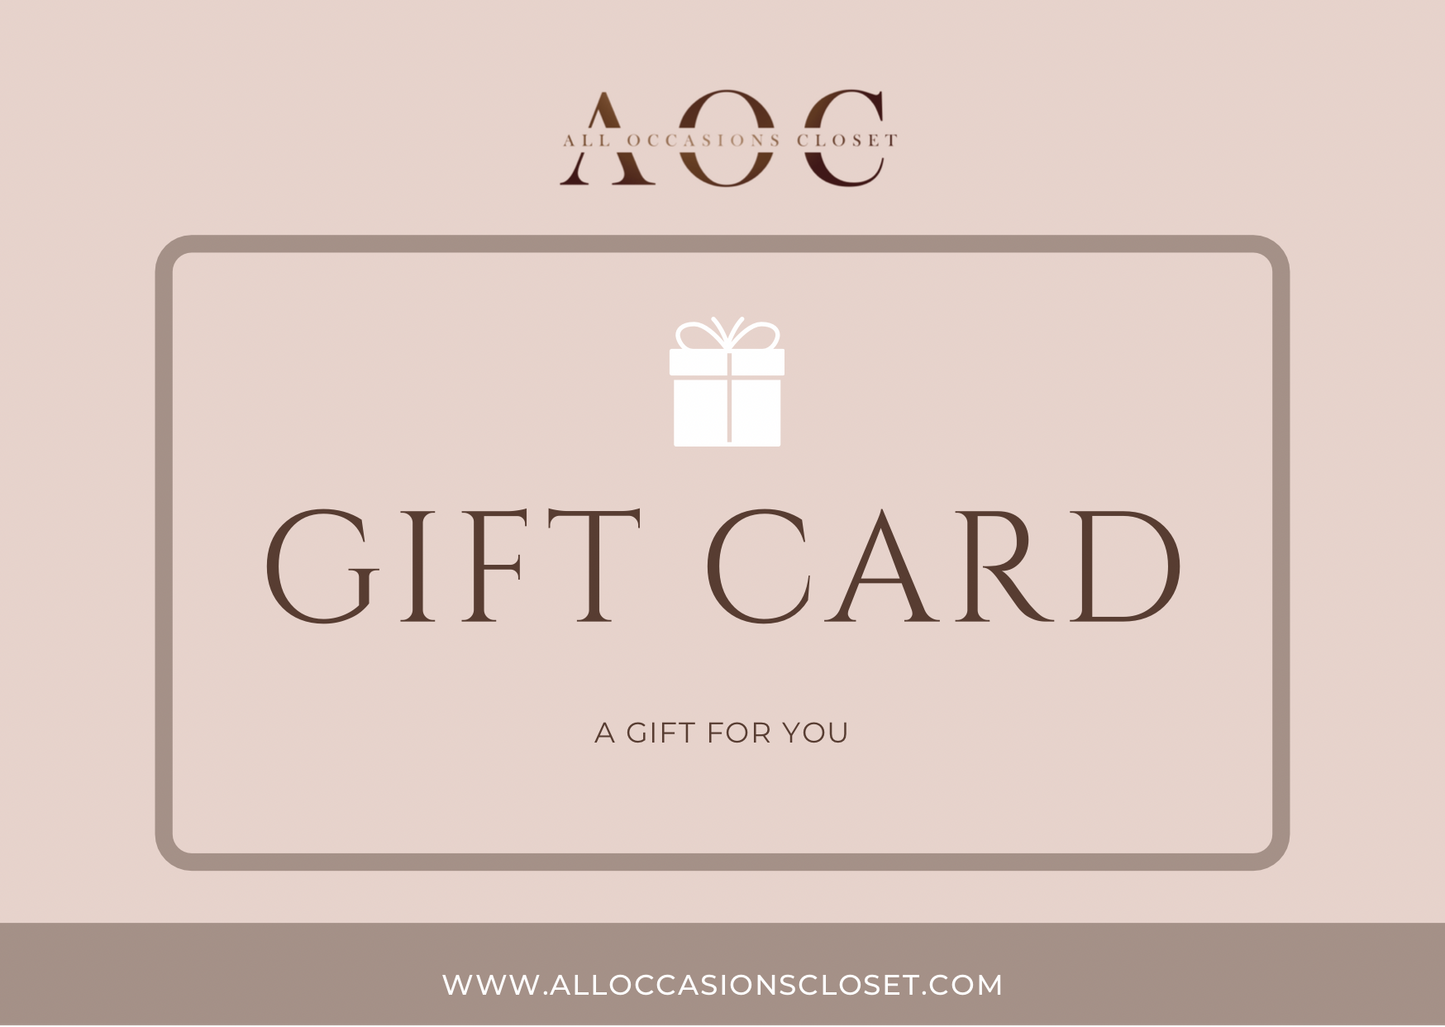 All Occasions Closet Gift Card